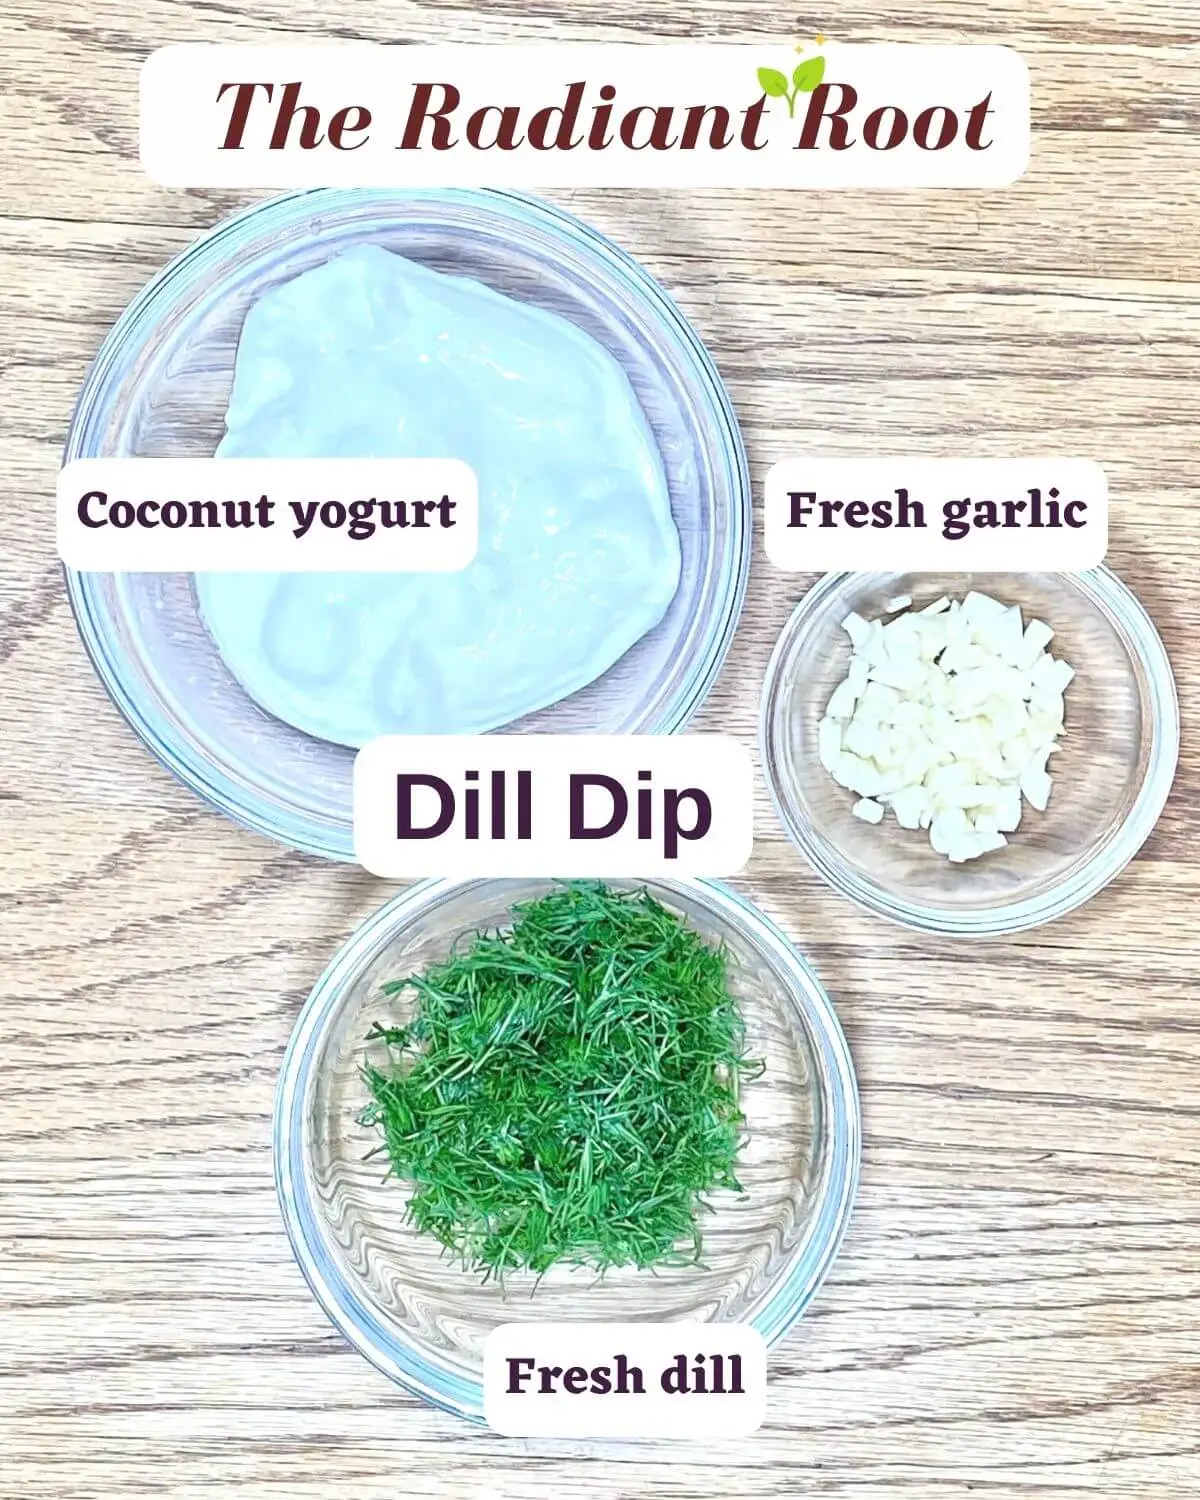 Vegan Dill Dip Ingredients Coconut yogurt, Fresh peeled and chopped garlic, and fresh chopped dill in three small glass bowls on a wooden table | What is Dill Dip Made of? | The Radiant Root